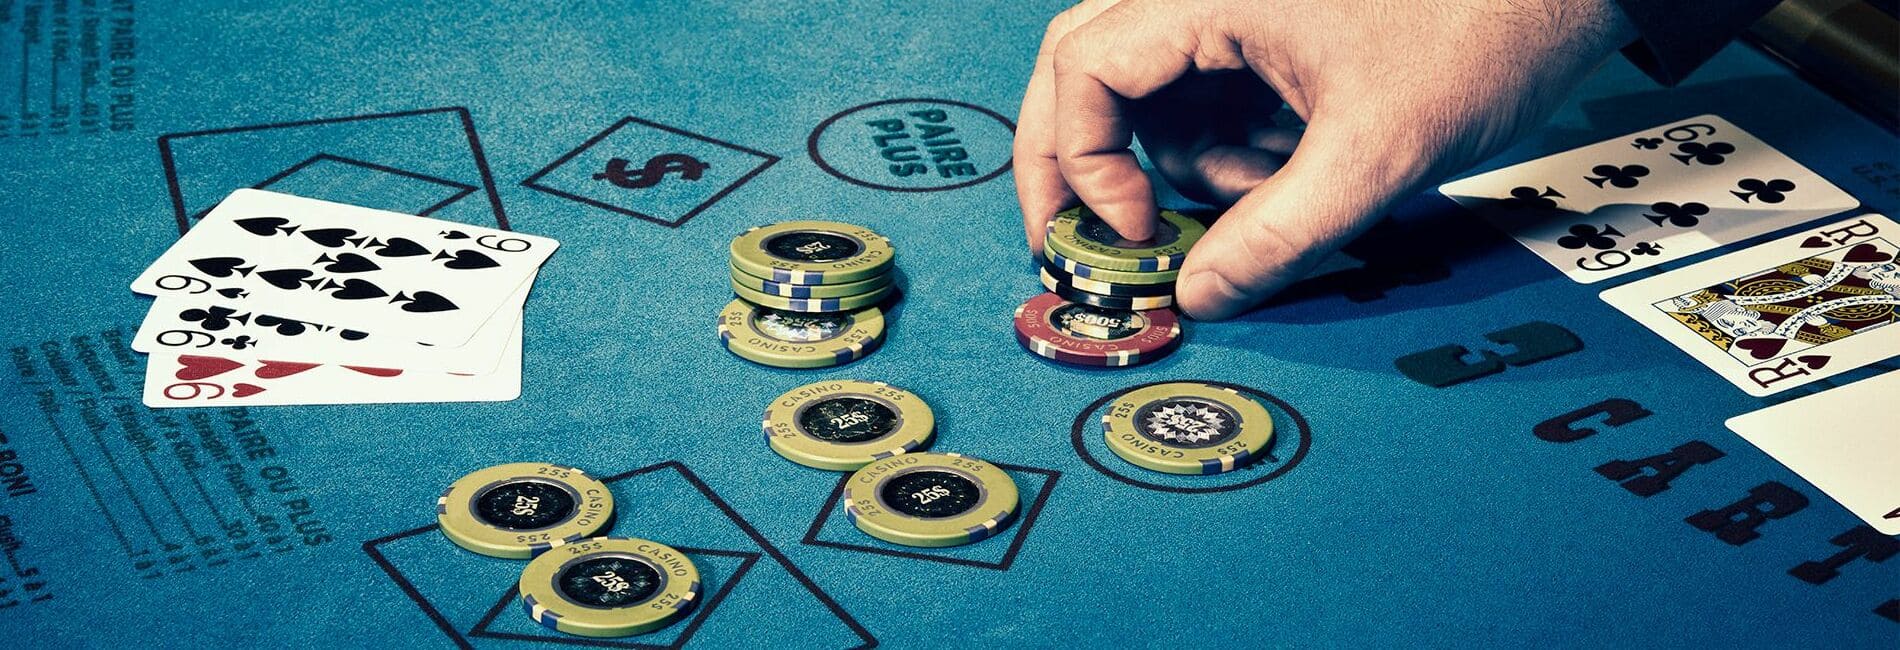 A Guide On How To Play Three Card Poker